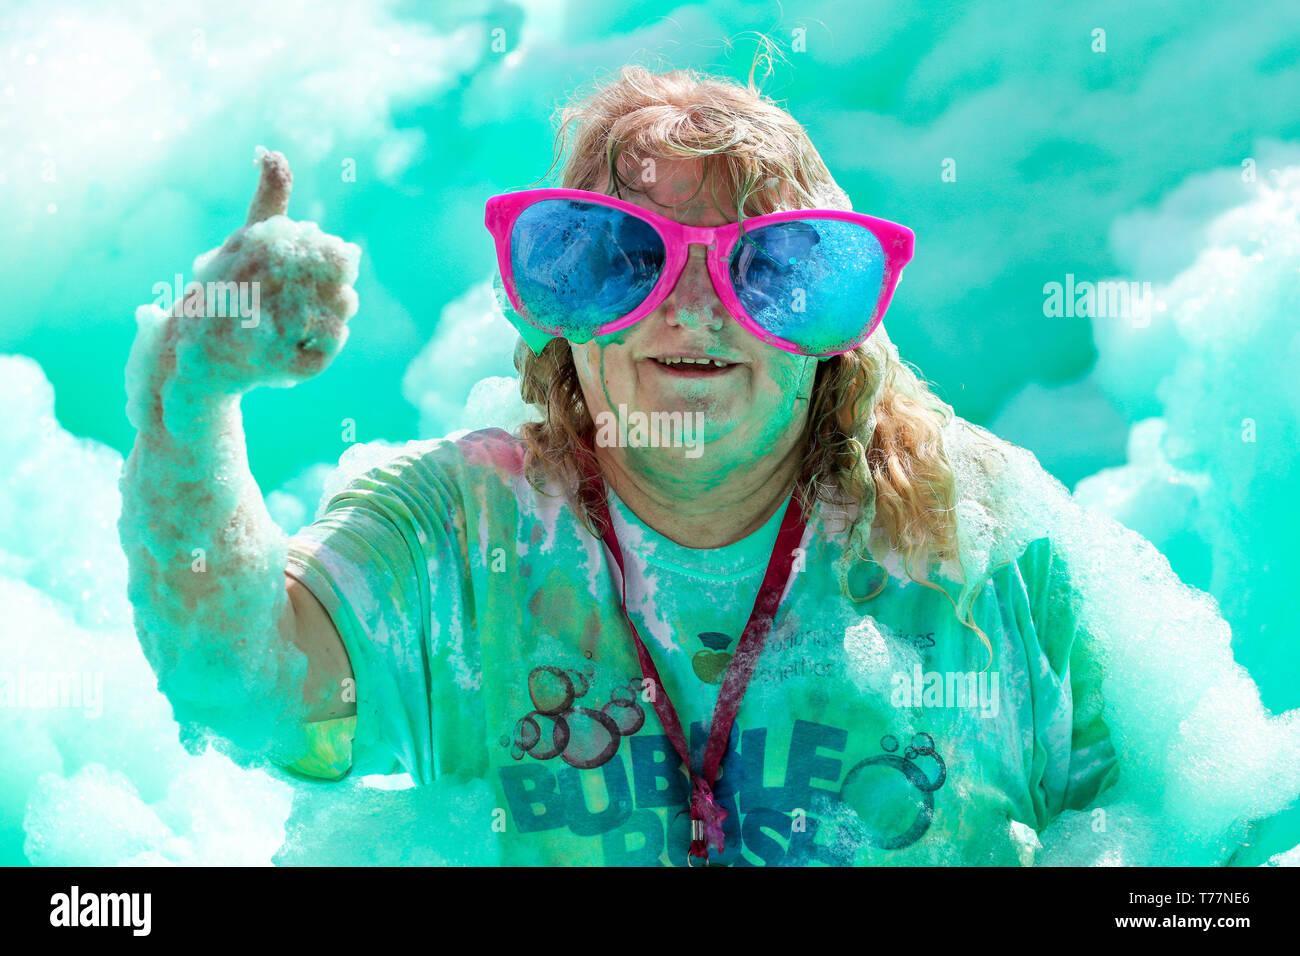 Glasgow, Scotland, UK. 5th May 2019. About 3,500 runners of all ages took part in the Bubble Rush Charity Run through Bellahouston Park, Glasgow to raise funds for the 'Prince and Princess of Wales Hospice'. The runners had to race over 5 kilometres and through pits of blue, yellow, red and green coloured foam before they successfully crossed the finish line. Credit: Findlay/Alamy Live News Stock Photo